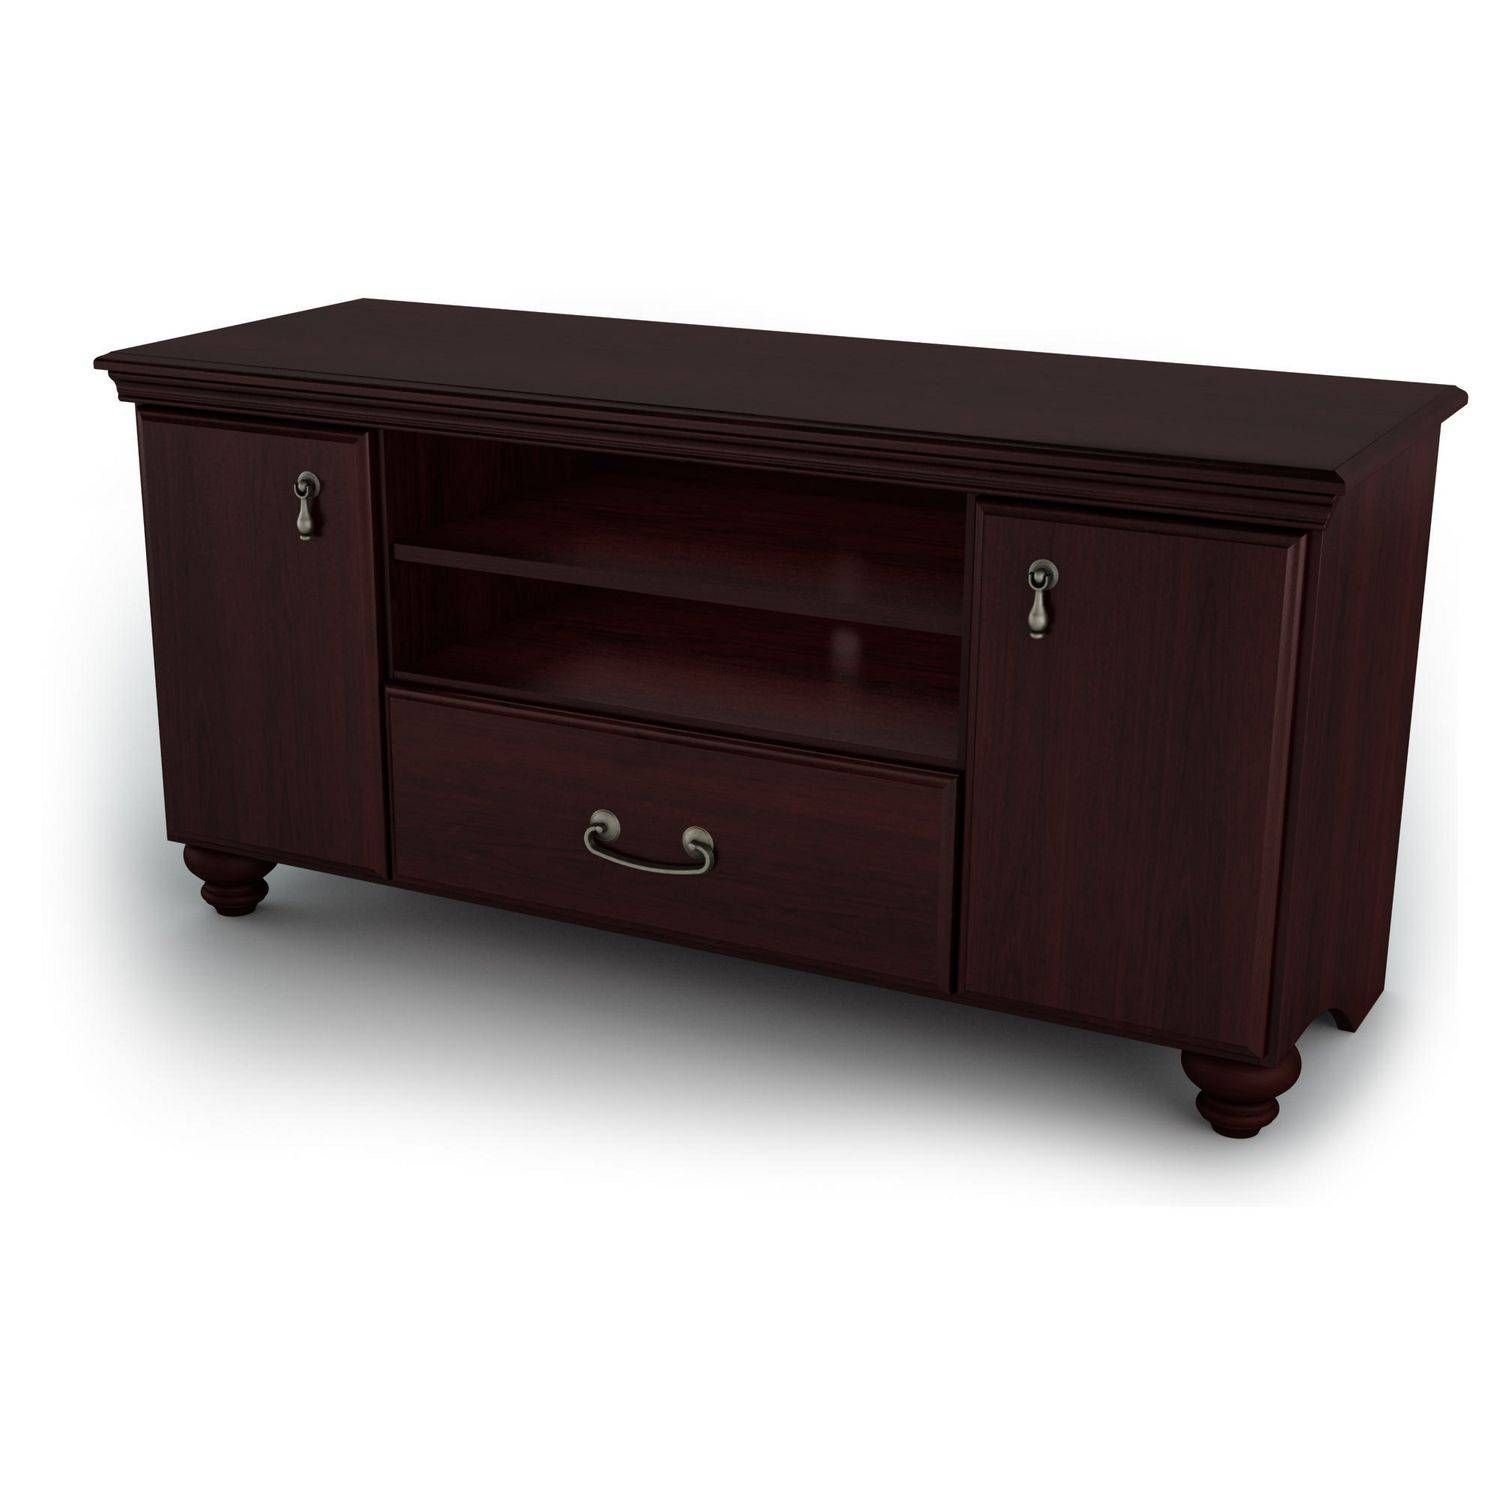 South Shore Noble Dark Mahogany Tv Stand/storage Unit | Walmart Canada Intended For Mahogany Tv Stands (Photo 15 of 15)